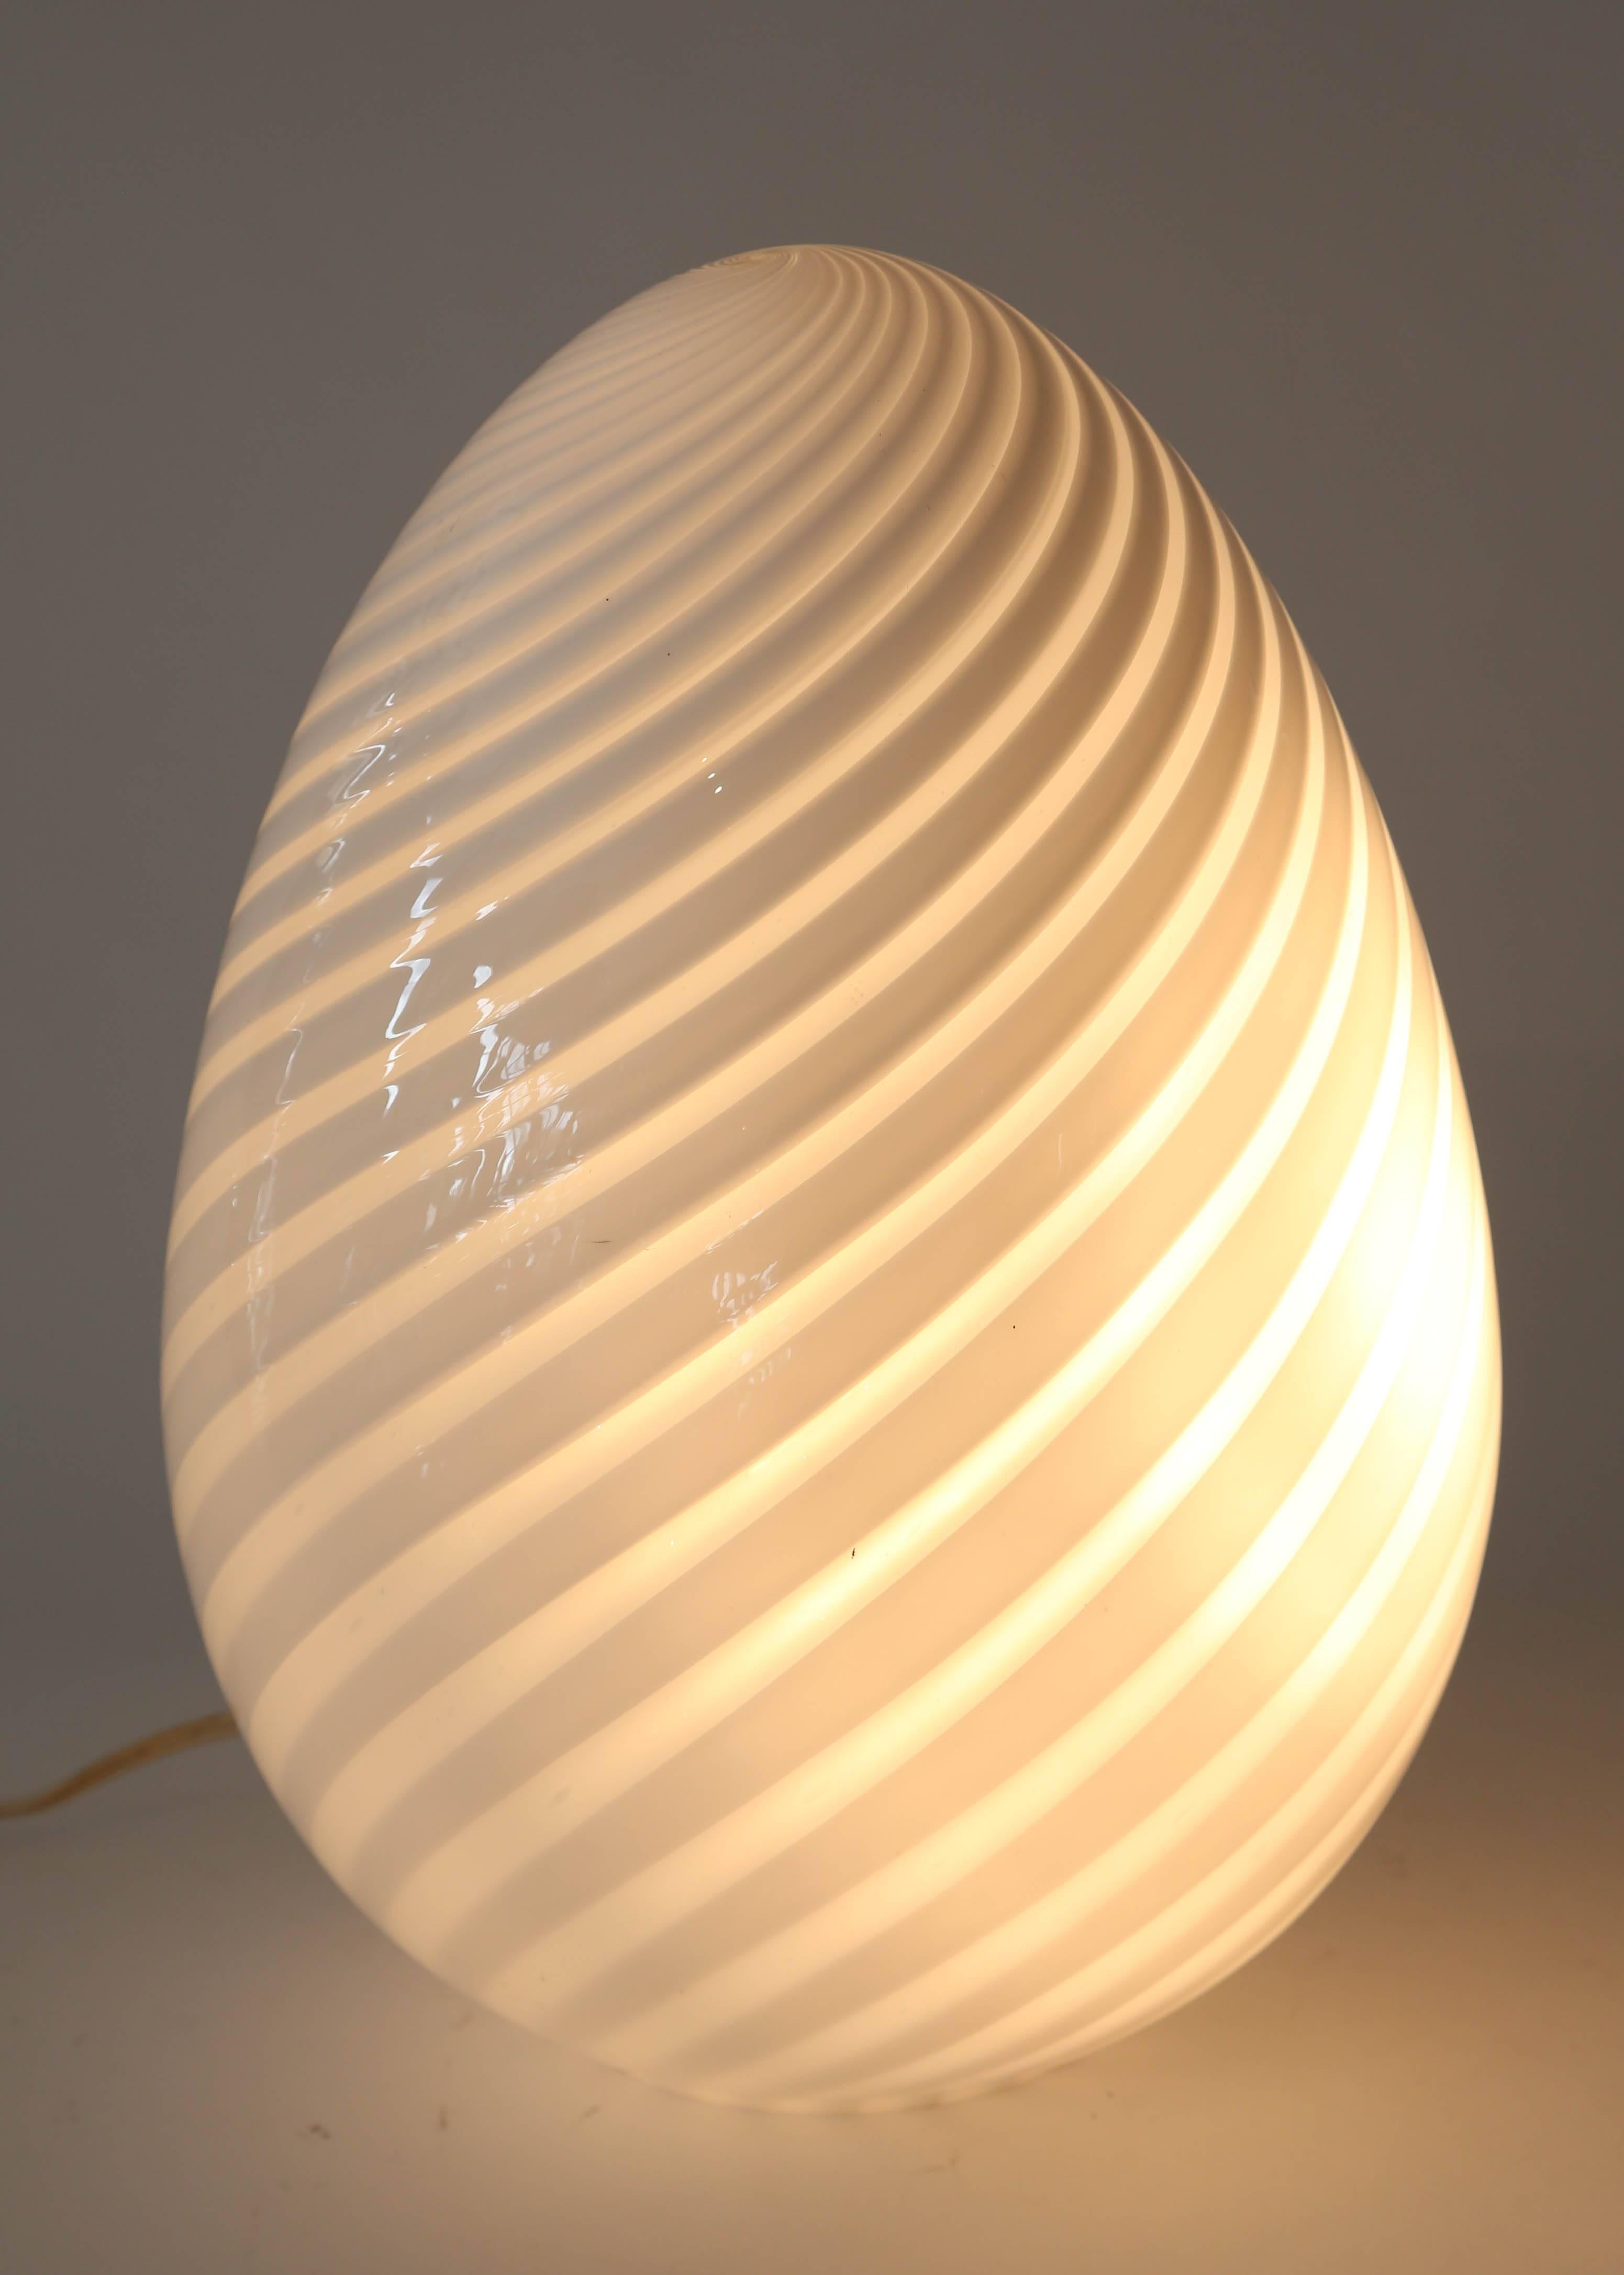 Stunning Mid-Century Modern Italian handblown Murano glass egg shape table lamp made by Vetri in the style of Venini. This lamp has a clear and white glass spiral pattern that casts a wonderful glow when lit. It stands 15